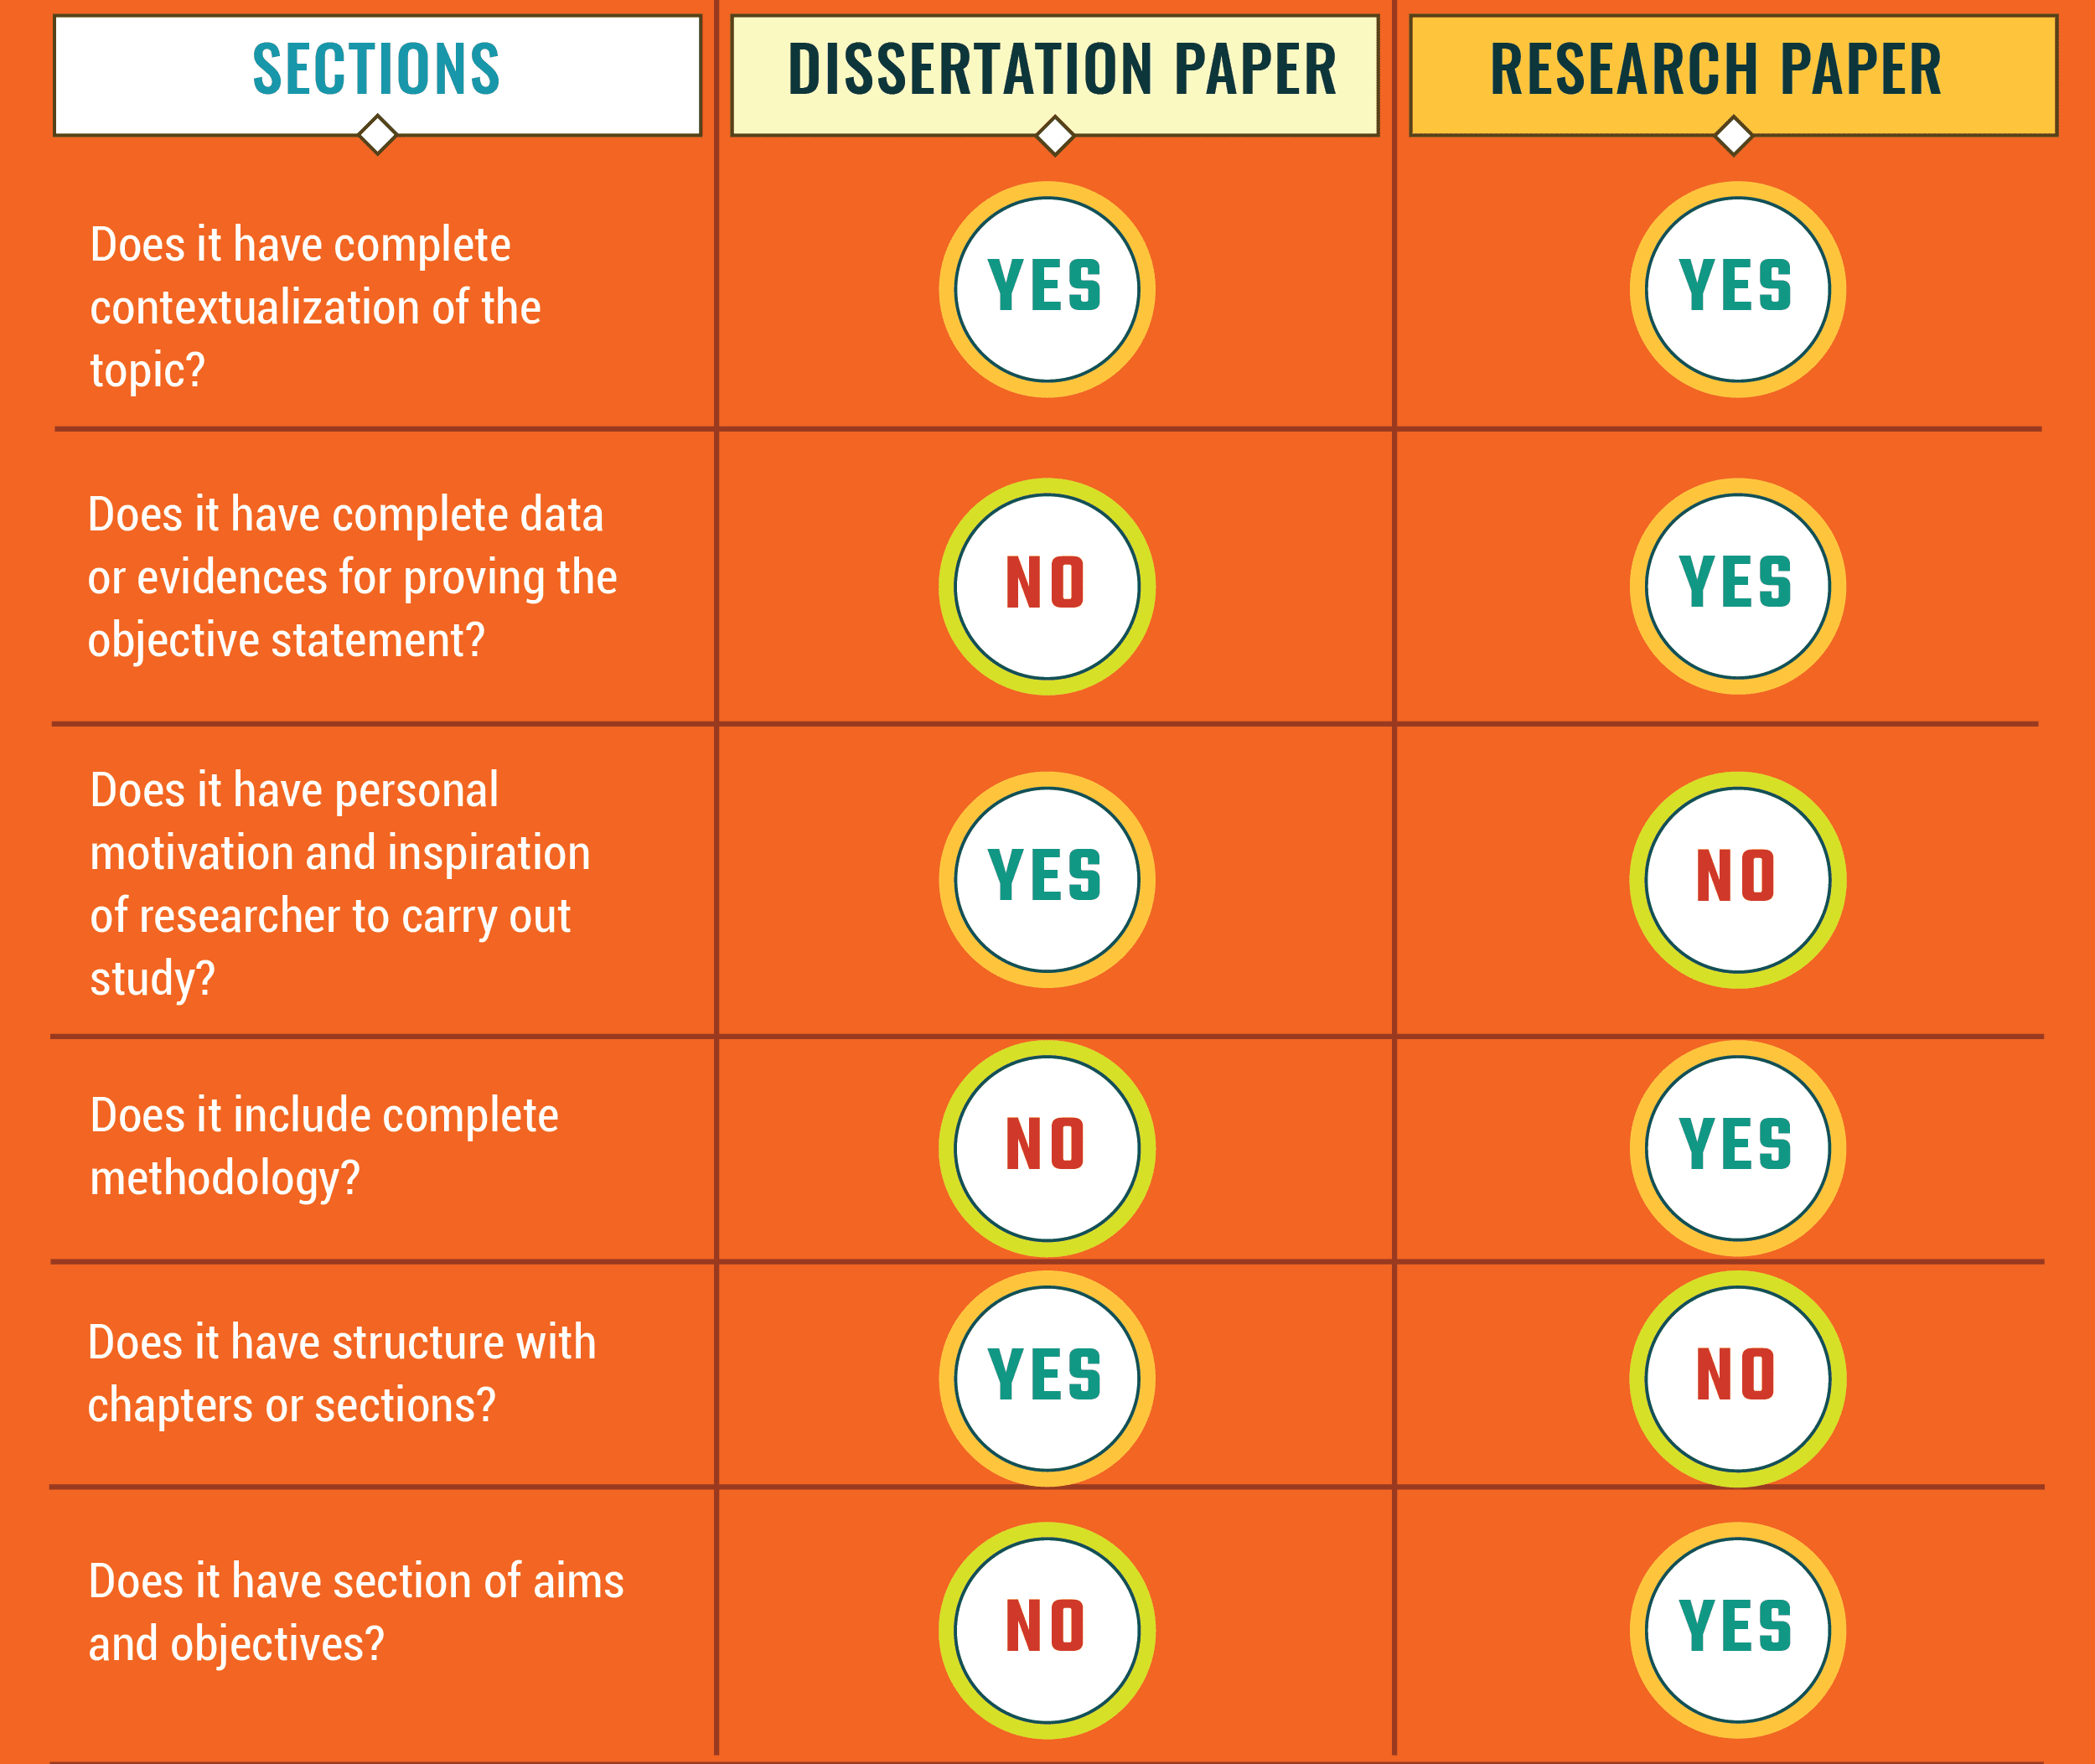 Difference Between Research Paper and Dissertation Paper